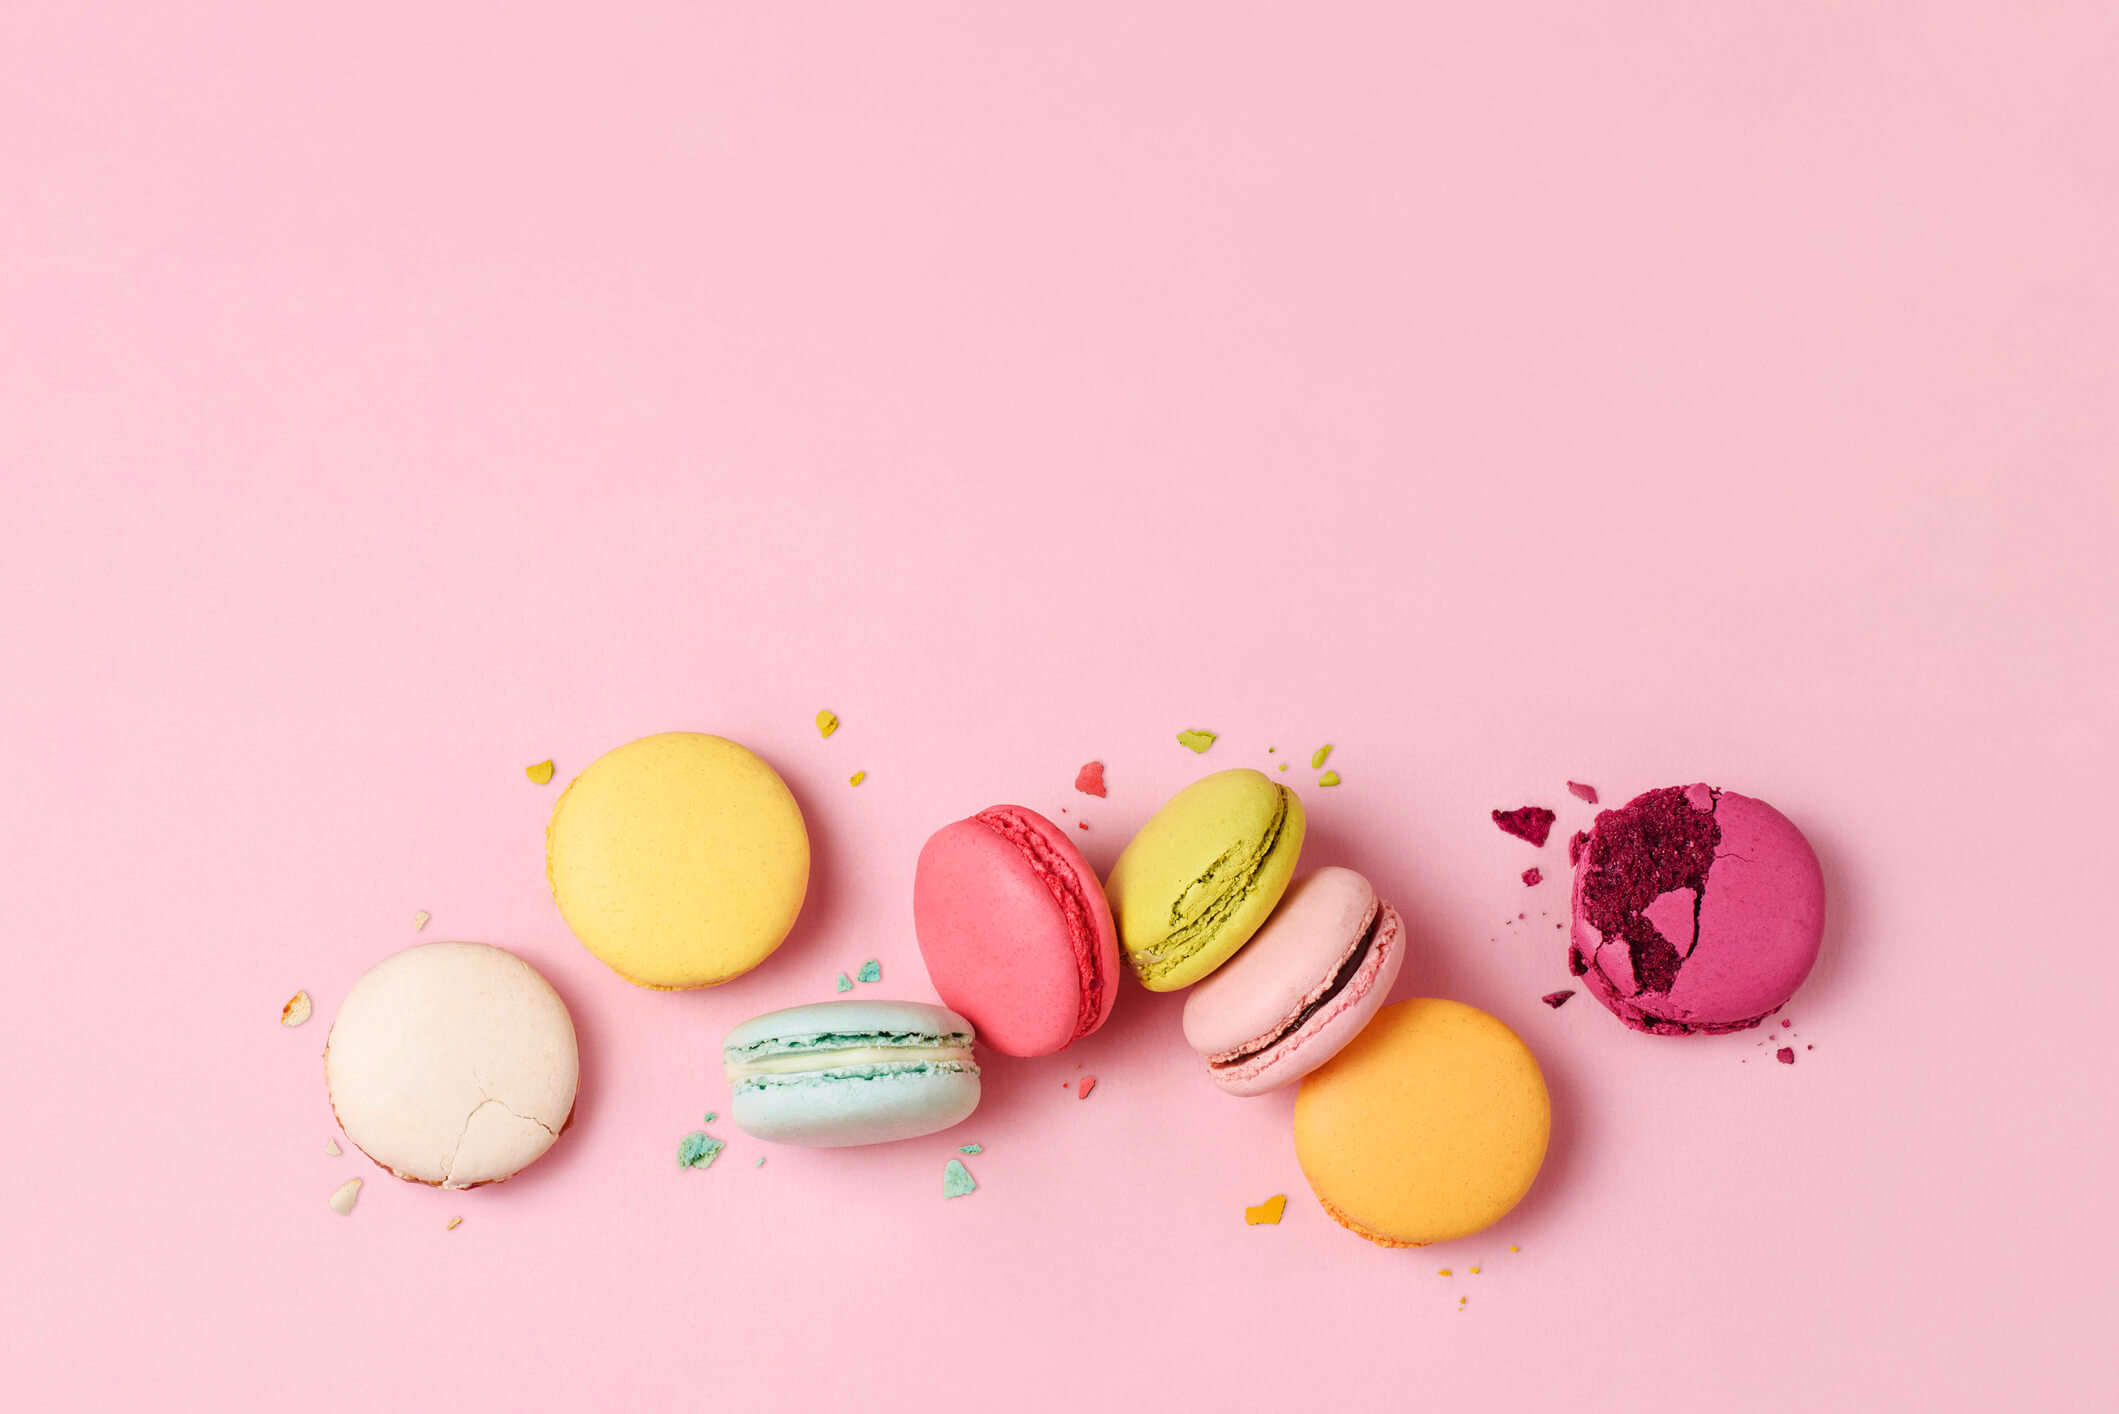 different coloured macarons on a pink background